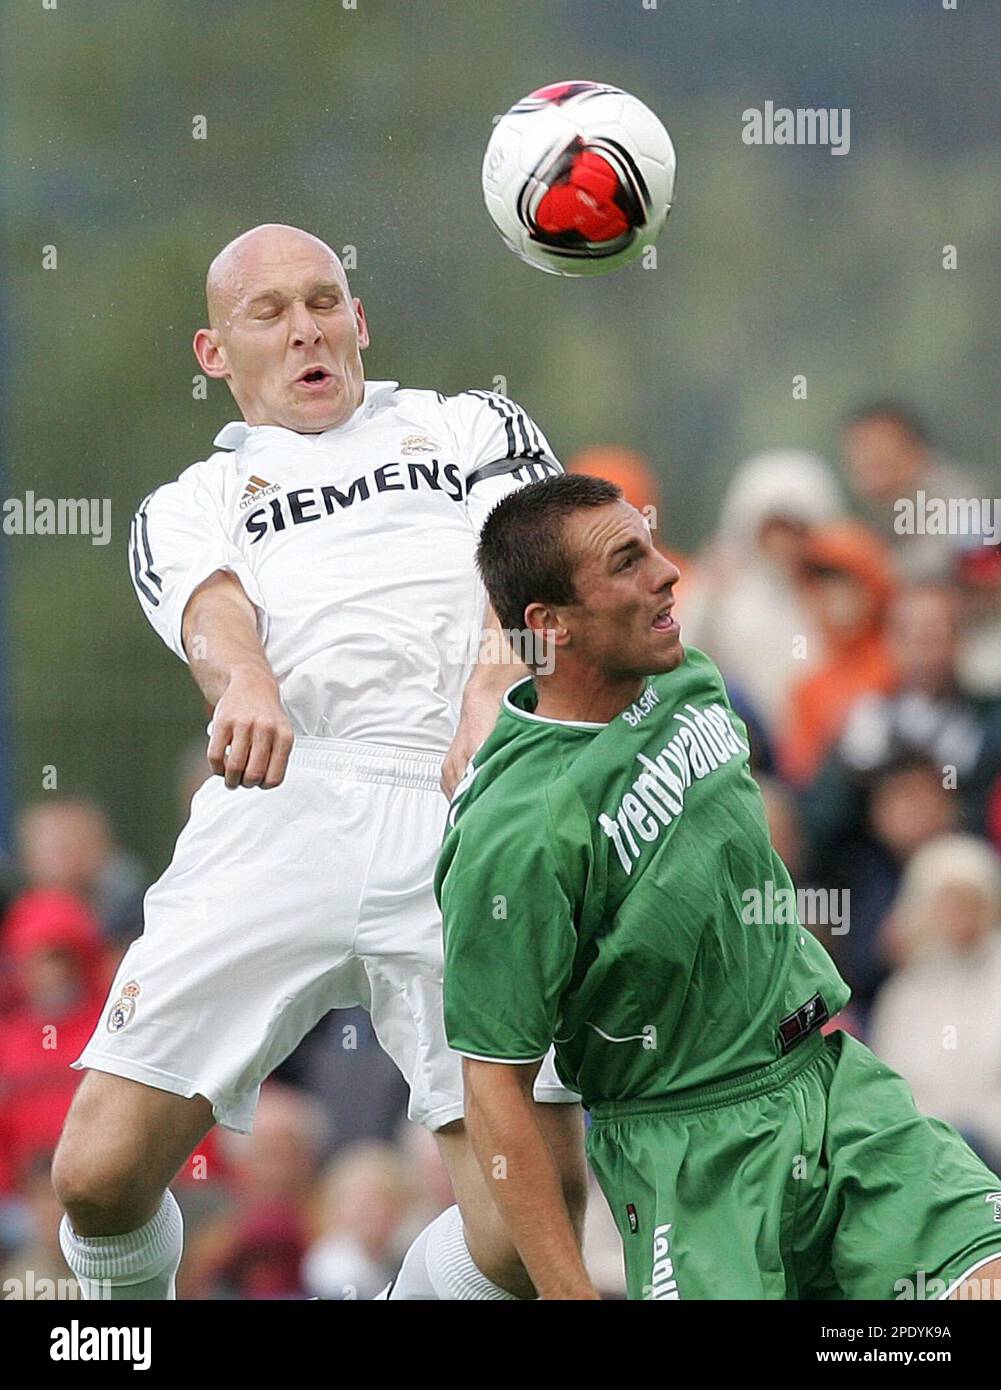 Real Madrid's Thomas Garvesen, left, challenges for the ball with ASK Trenkwalder's Reinhard Burits during a friendly soccer match Sunday, Aug.7, 2005, in Irdning, Austria. Real Madrid is on pre-season training camp in Austria. (AP Photo/Andreas Schaad) Stock Photo